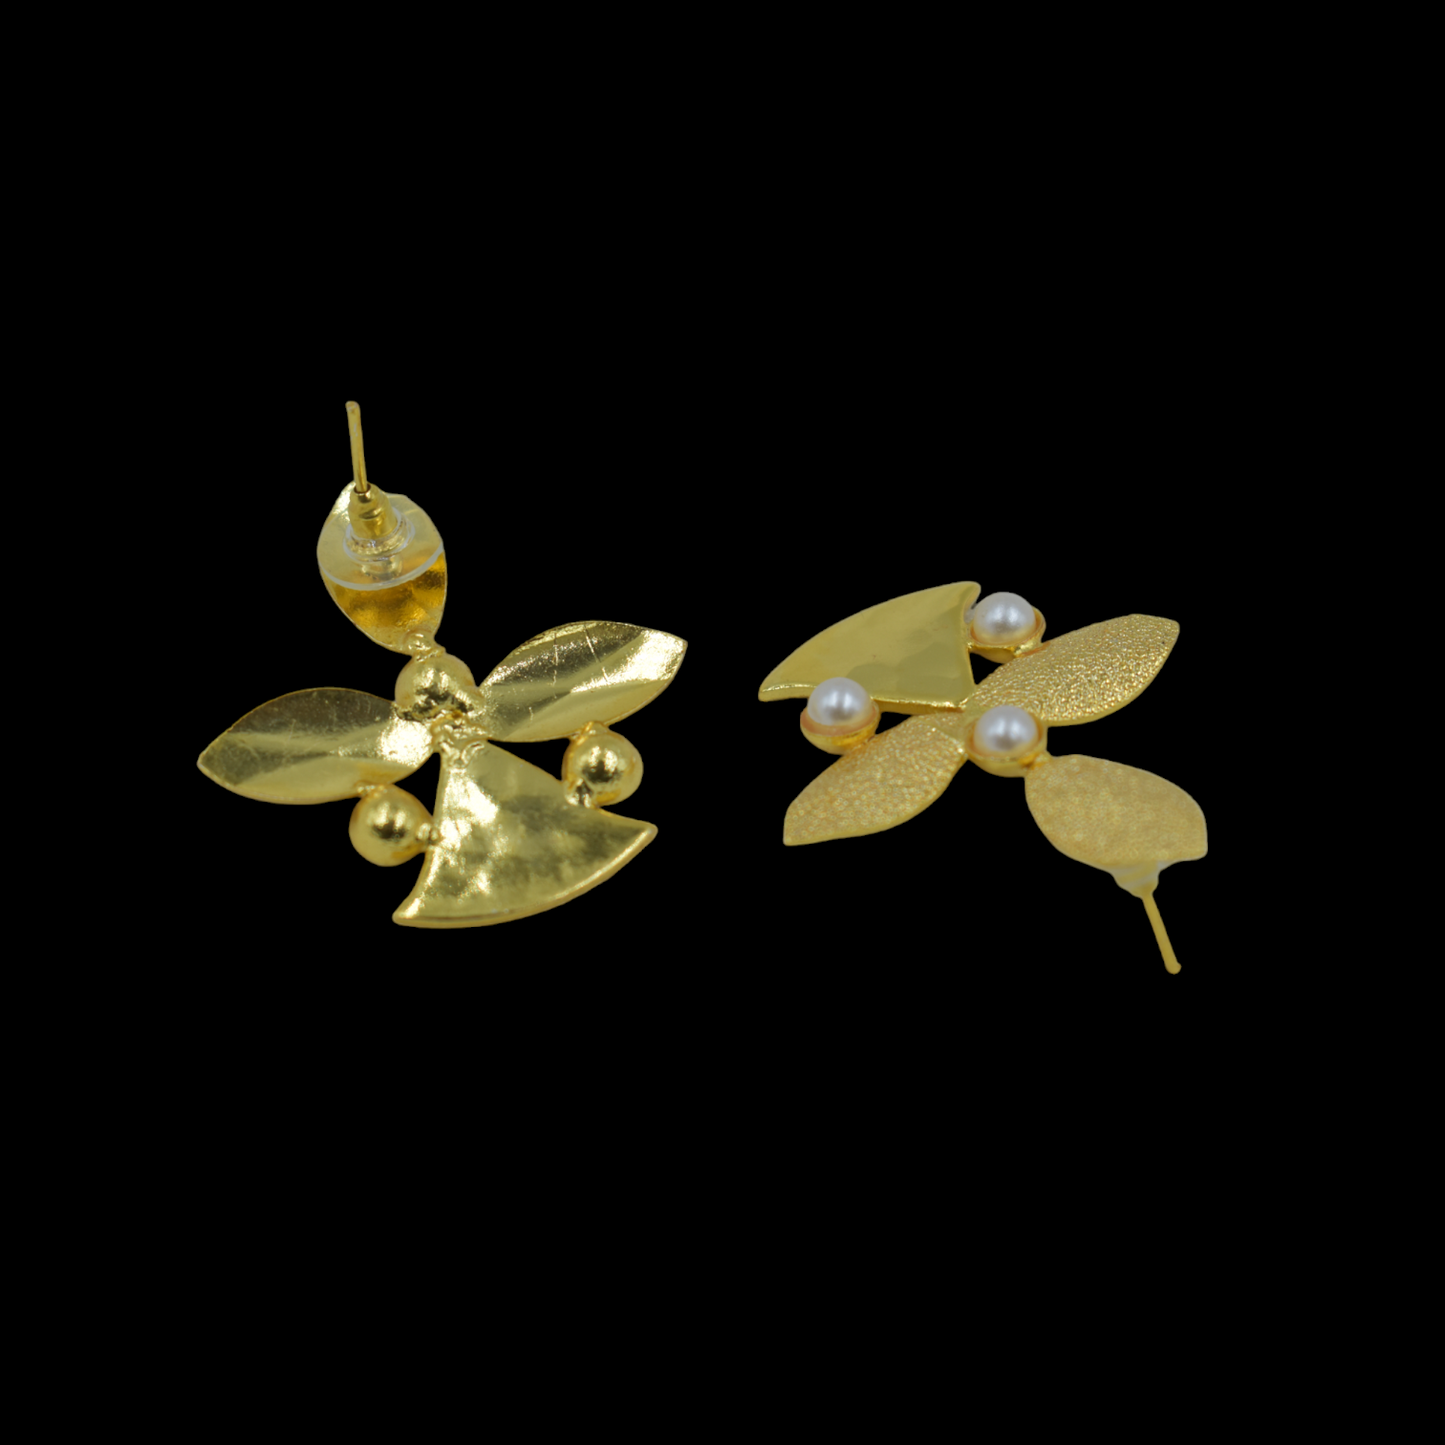 Goldplated MOP stone stud earing